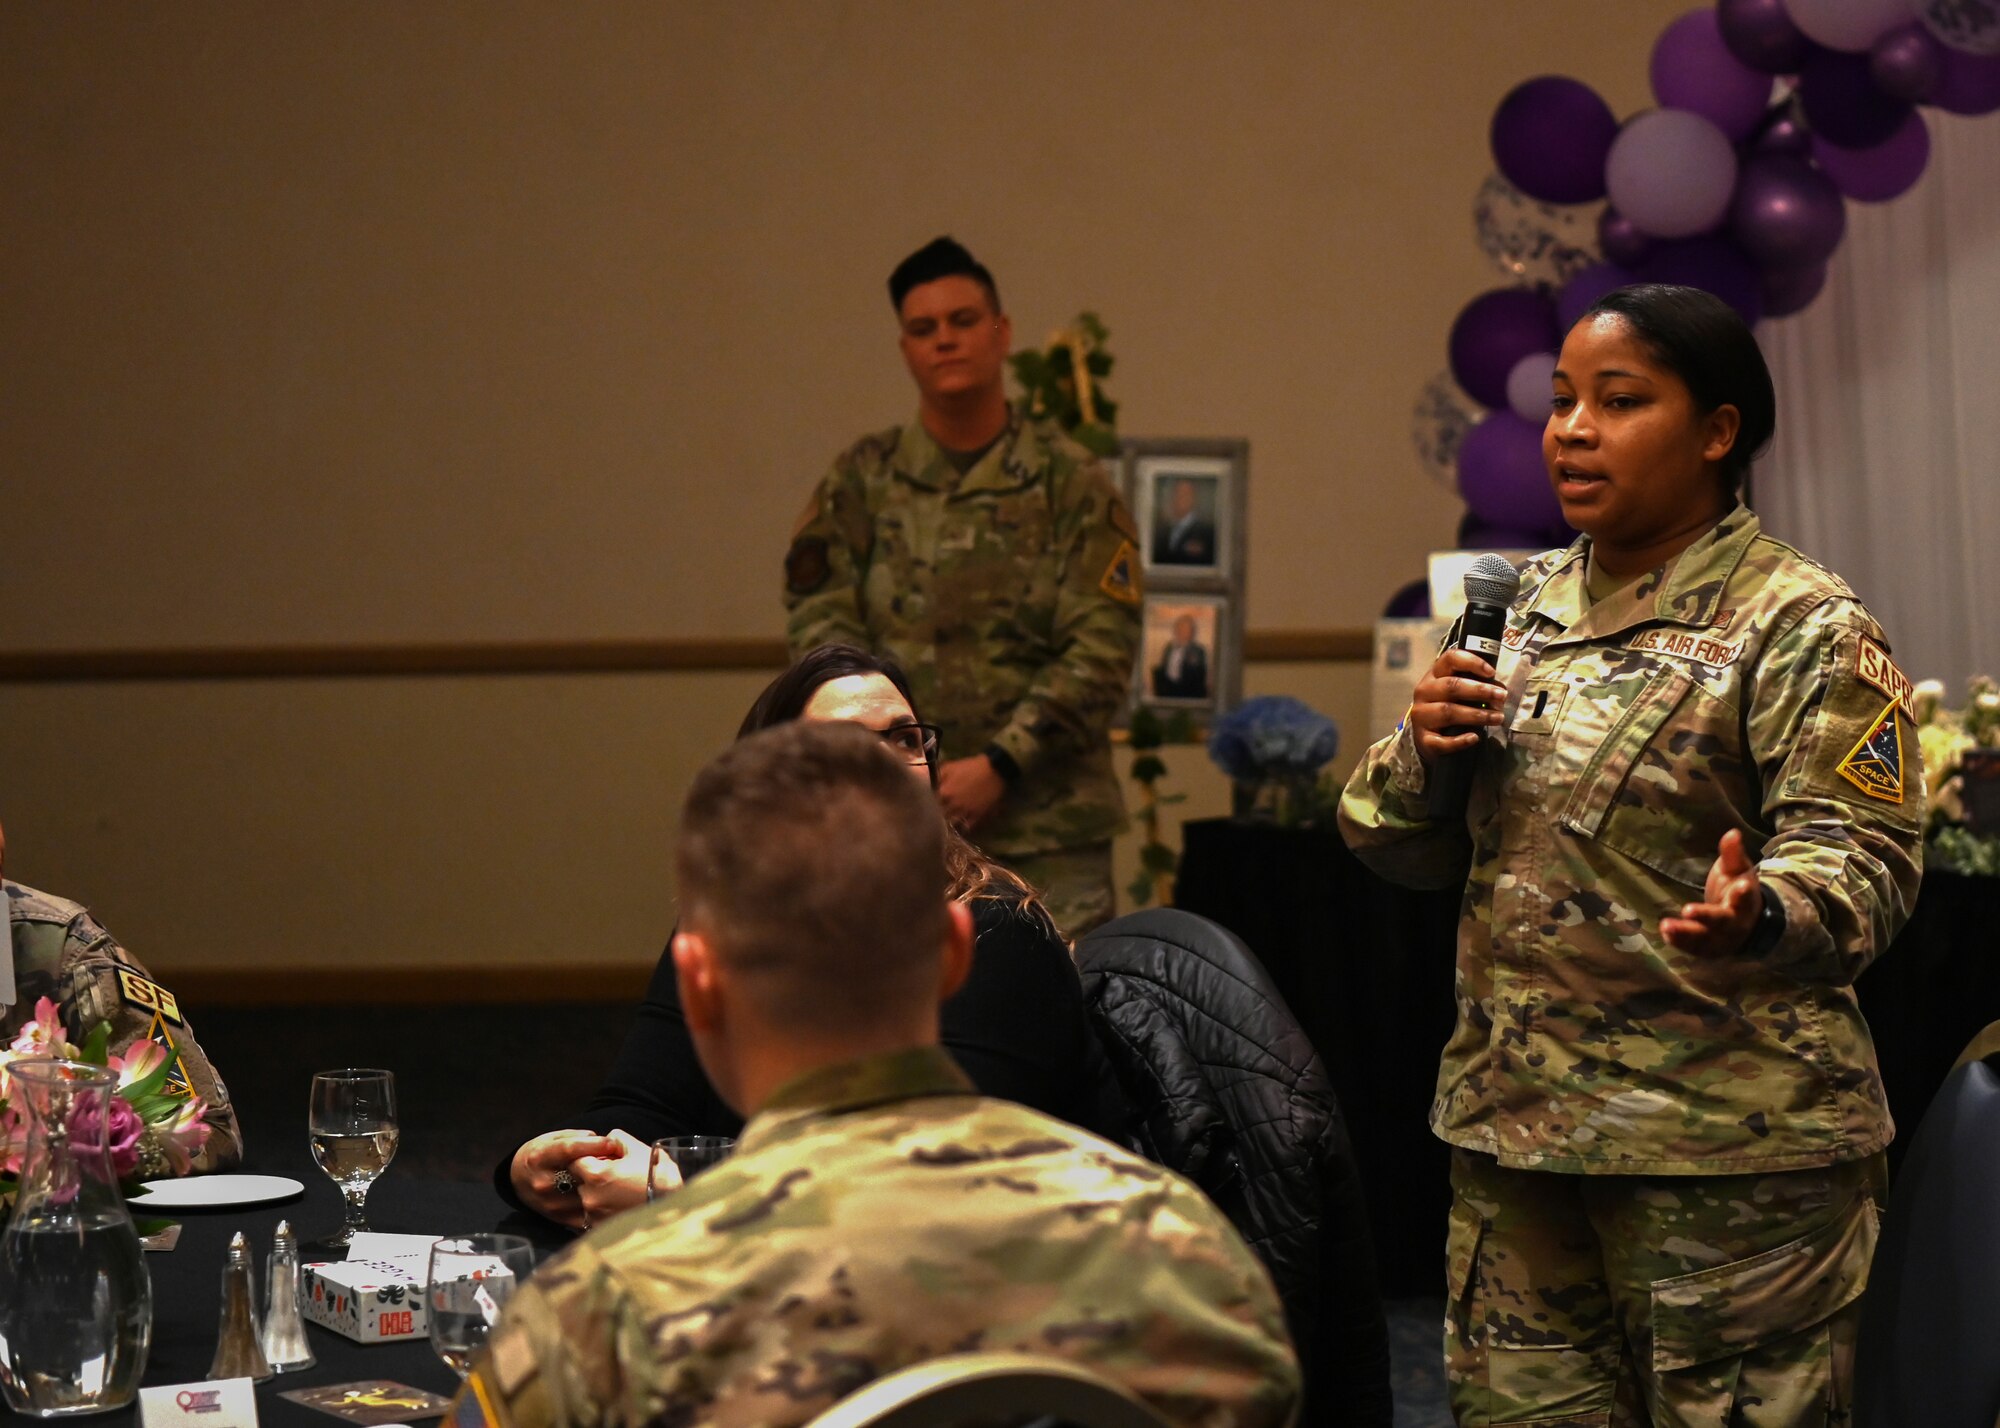 2nd Lt. Mone Ford, 30th Sexual Assault Prevention Response deputy sexual assault response coordinator, speaks to the guests during the Women's History Month luncheon at Vandenberg Space Force Base, Calif., March 21, 2023. The Vandenberg community came together to celebrate Women's History Month during a luncheon today at the Pacific Coast Club. (U.S. Space Force photo by Senior Airman Tiarra Sibley)